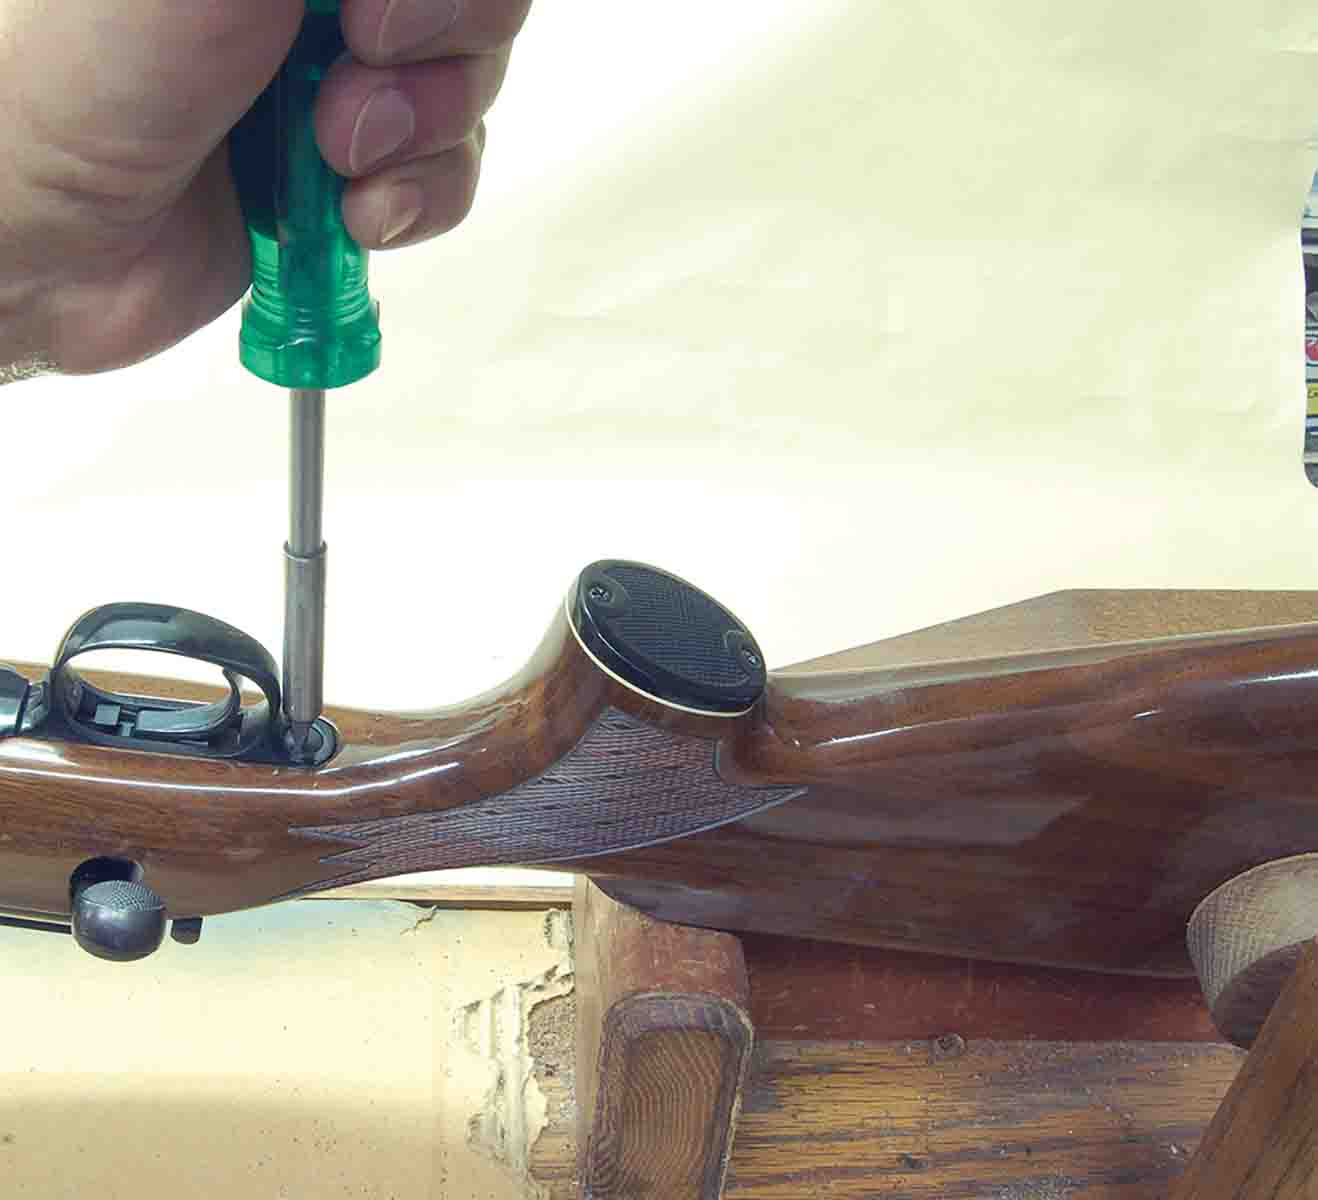 Removing a slotted guard screw requires clamping a rifle in a gun vise to prevent the screwdriver from slipping out of the screw slot.